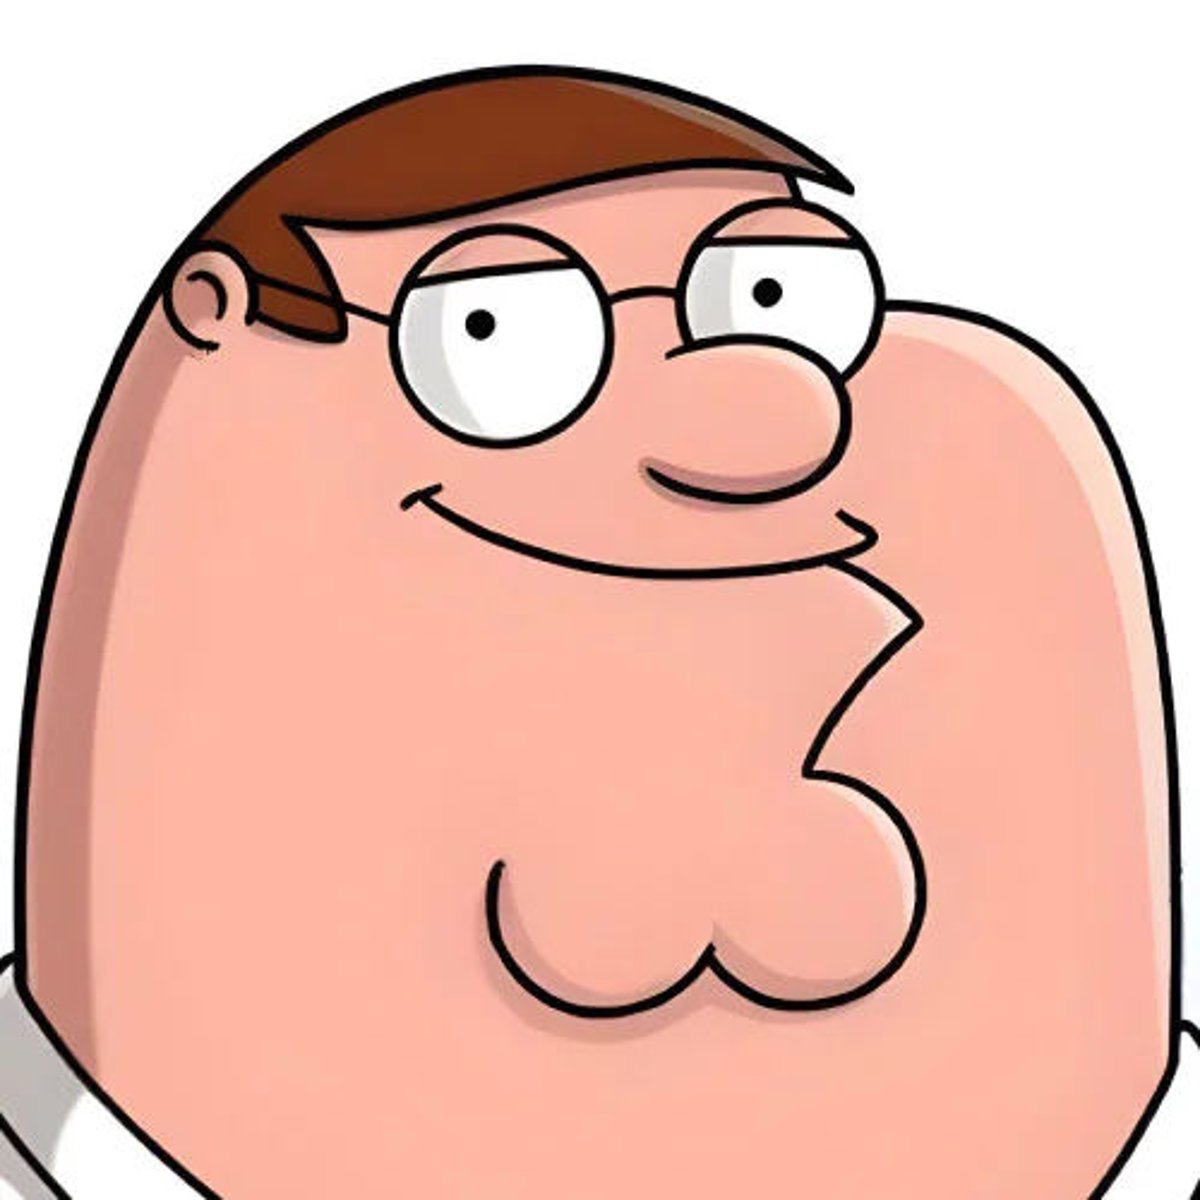 Peter Griffin (Family Guy)